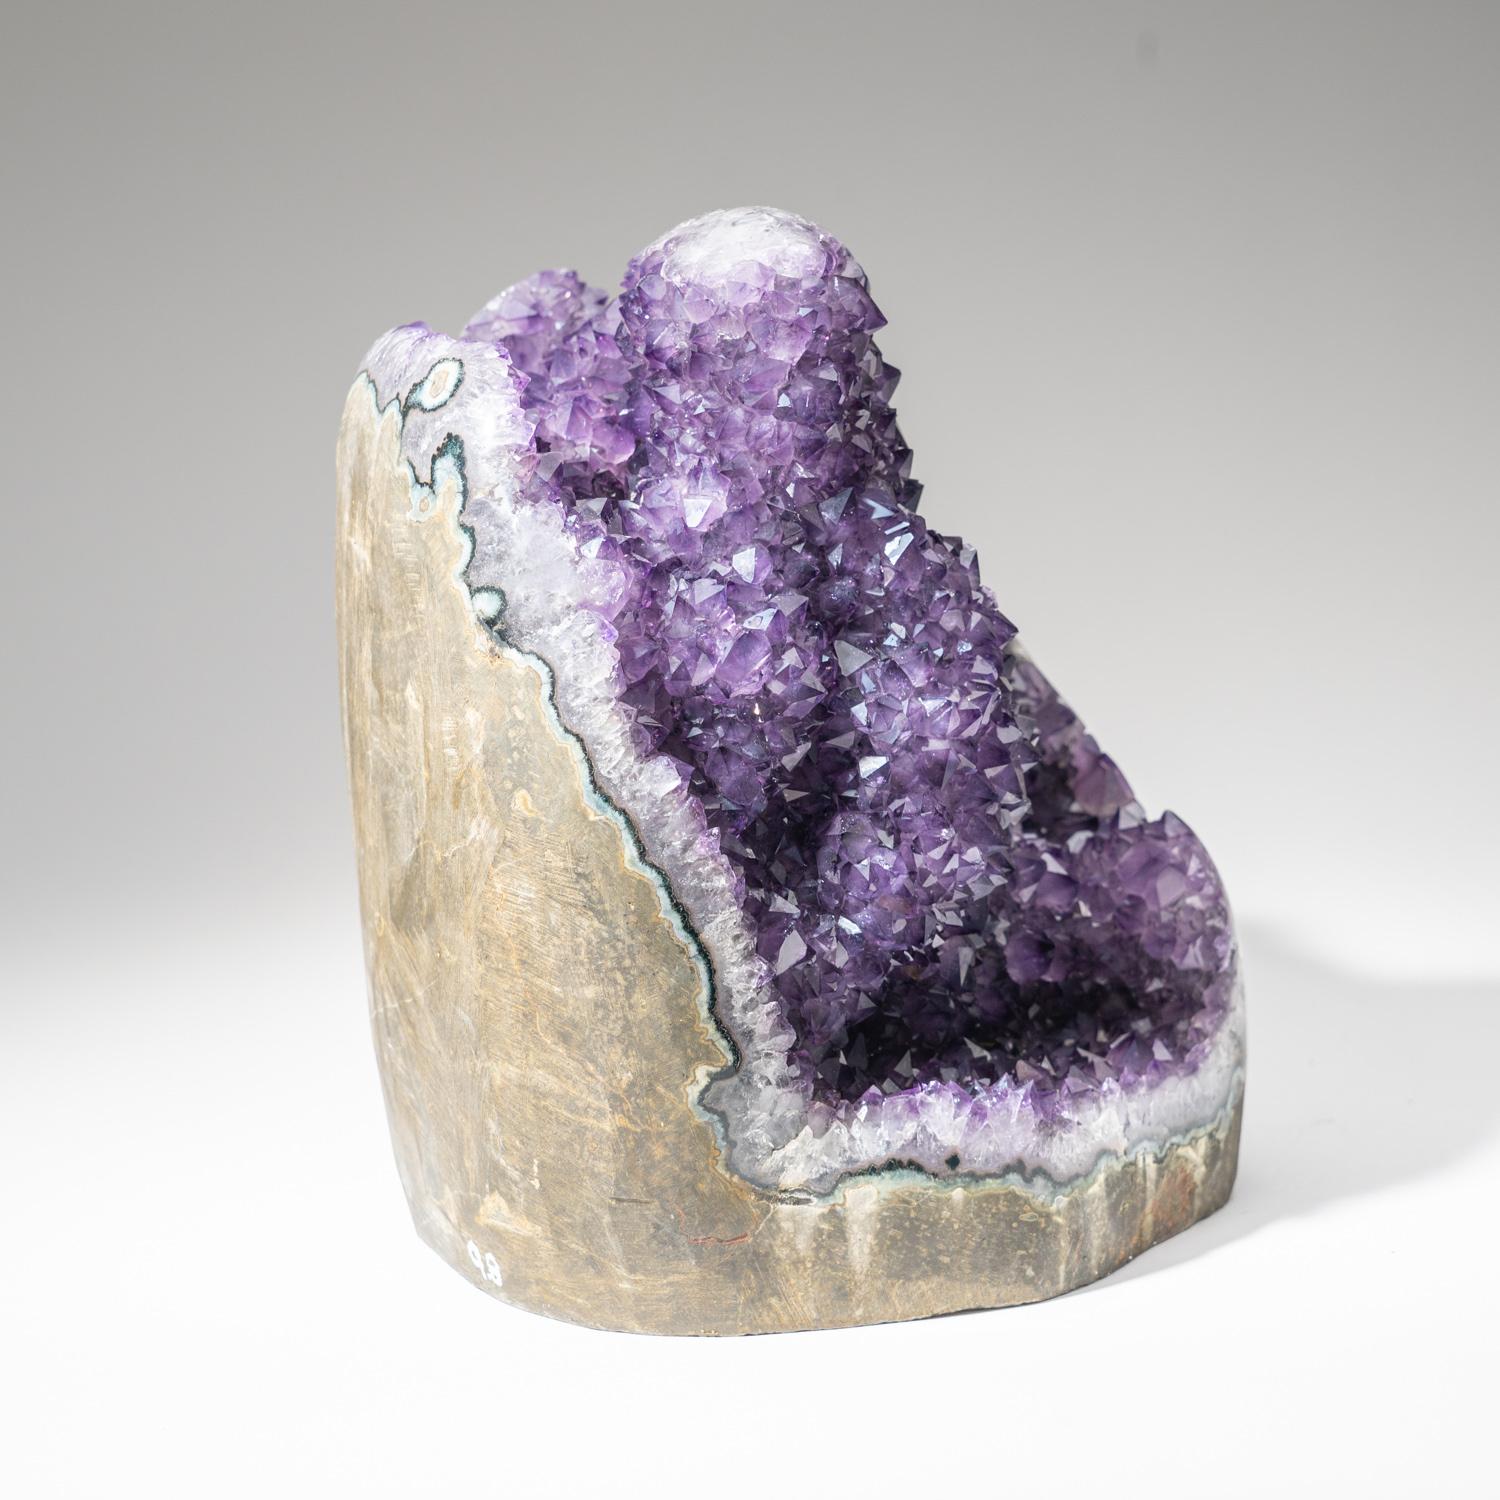 Contemporary Genuine Amethyst Cluster Geode from Uruguay (21.5 lbs) For Sale